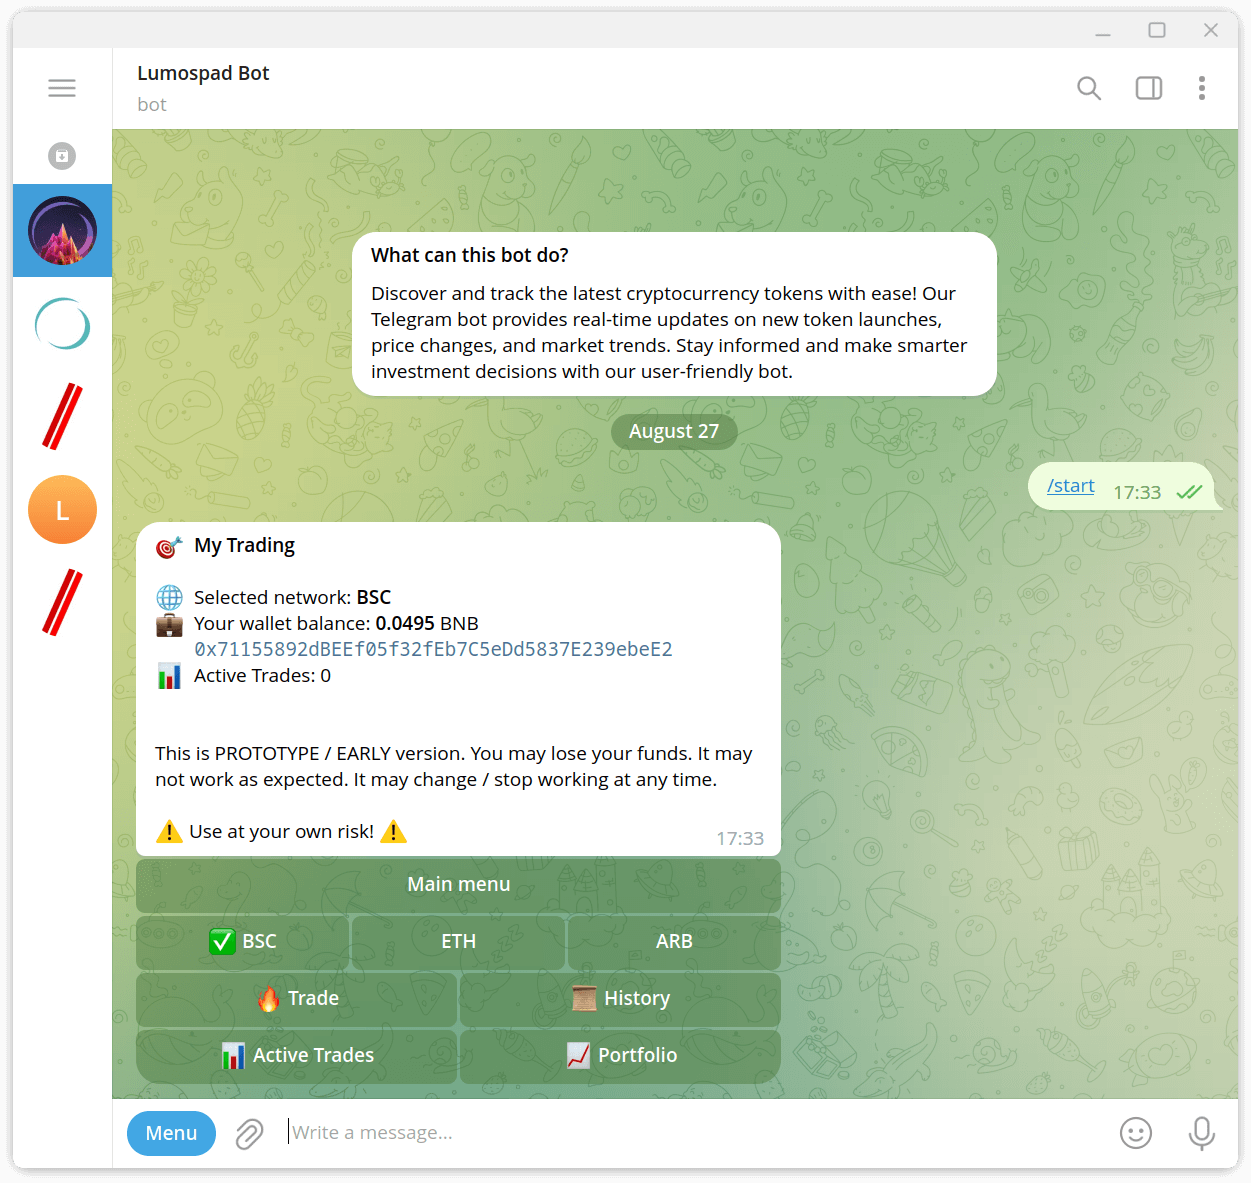 We offer you Trading Bot experience via Telegram. If you access My Trading for the first time, you will get new wallet created (one for all three networks BSC, ETH and ARB). You should store mnemonics words / private key safely, best on a paper or password manager. From now on, if you fill wallet with some funds, you will be able to select token and Buy or Sell it via Telegram.